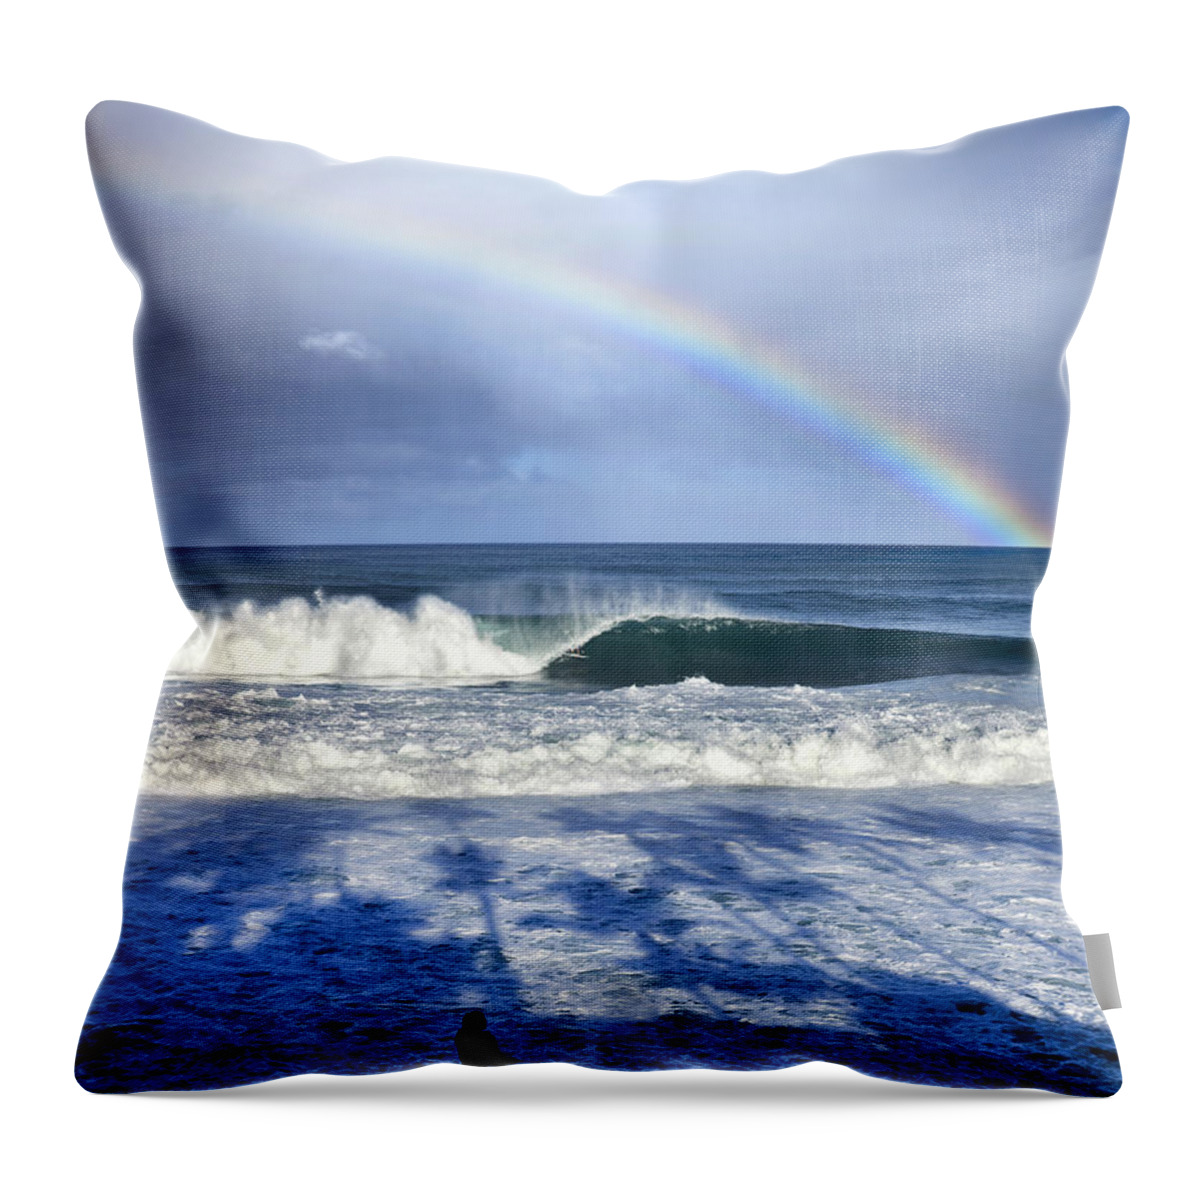  Tropical Throw Pillow featuring the photograph Pipe Rainbow Palms by Sean Davey